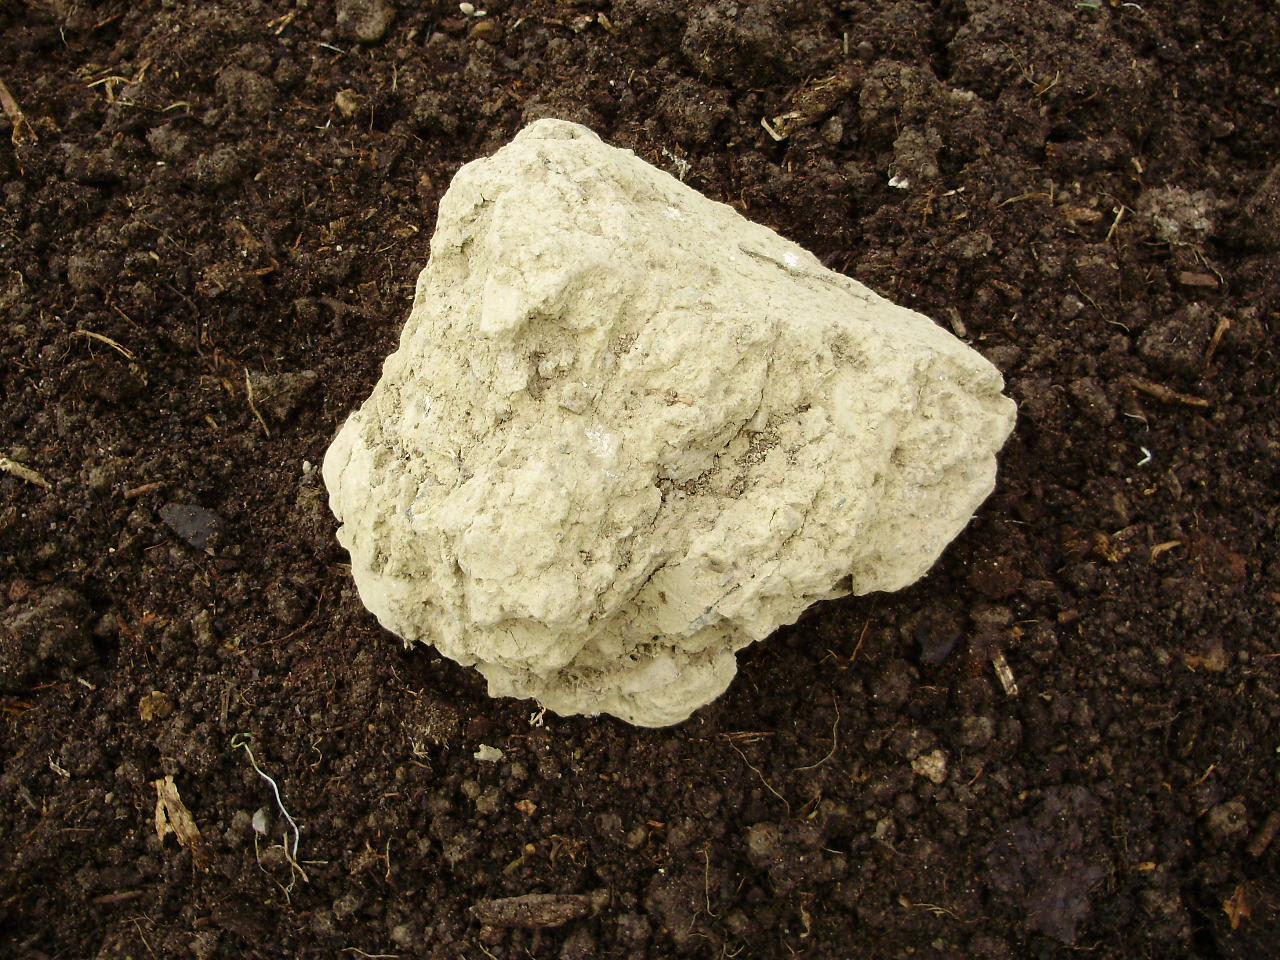 A lump of that soil sitting on my soil now!